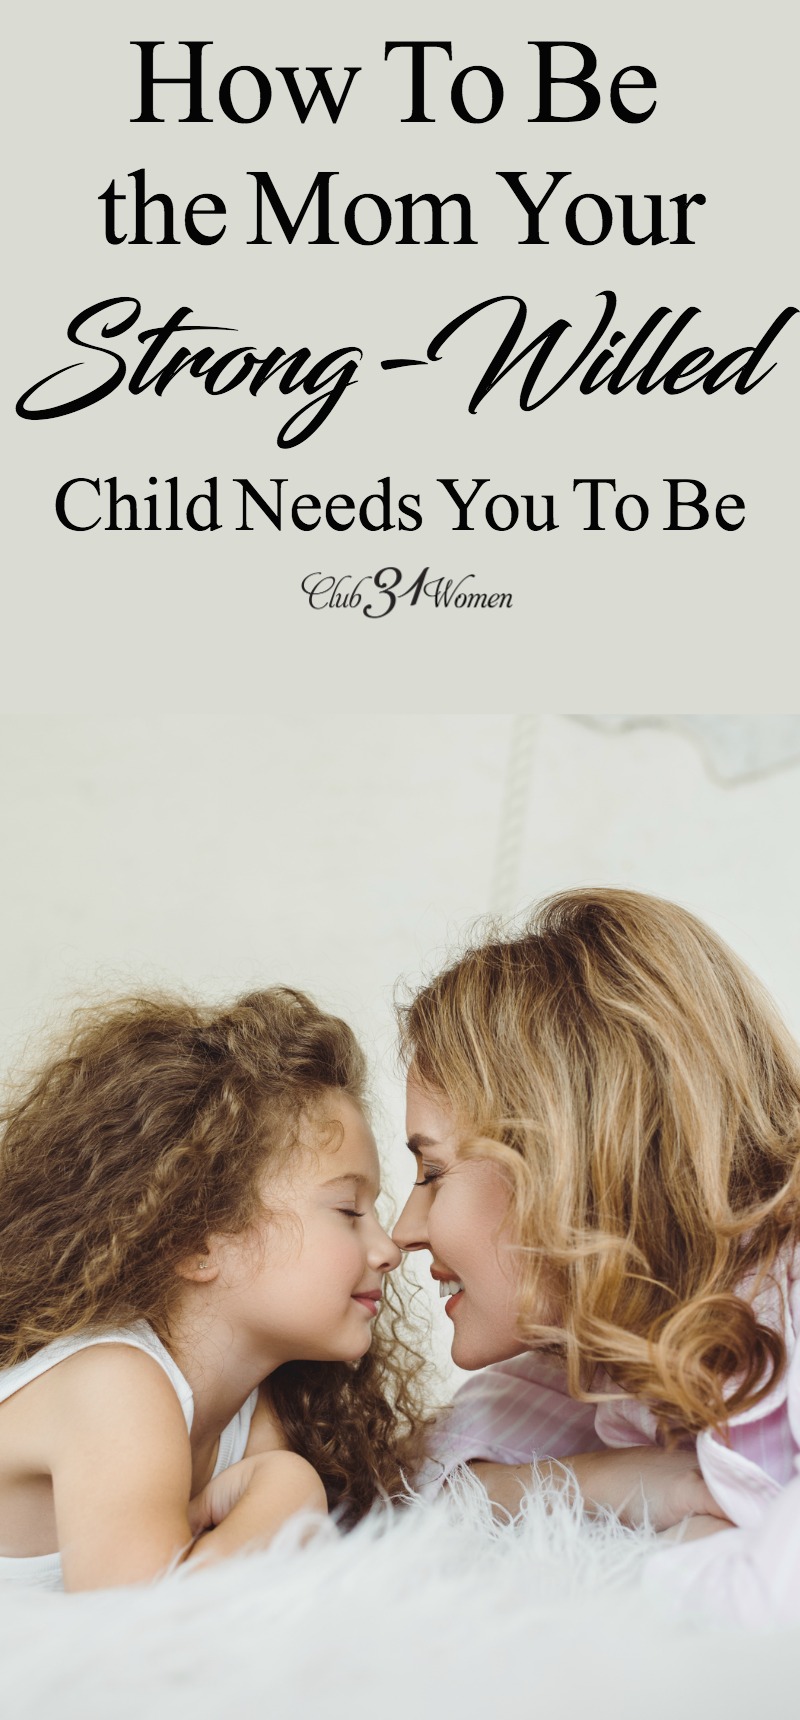 Do you have a strong-willed child? Wonder how you can be the best mom to such a determined kid? Here's encouraging and helpful advice from a mom who knows! ~ Club31Women via @Club31Women